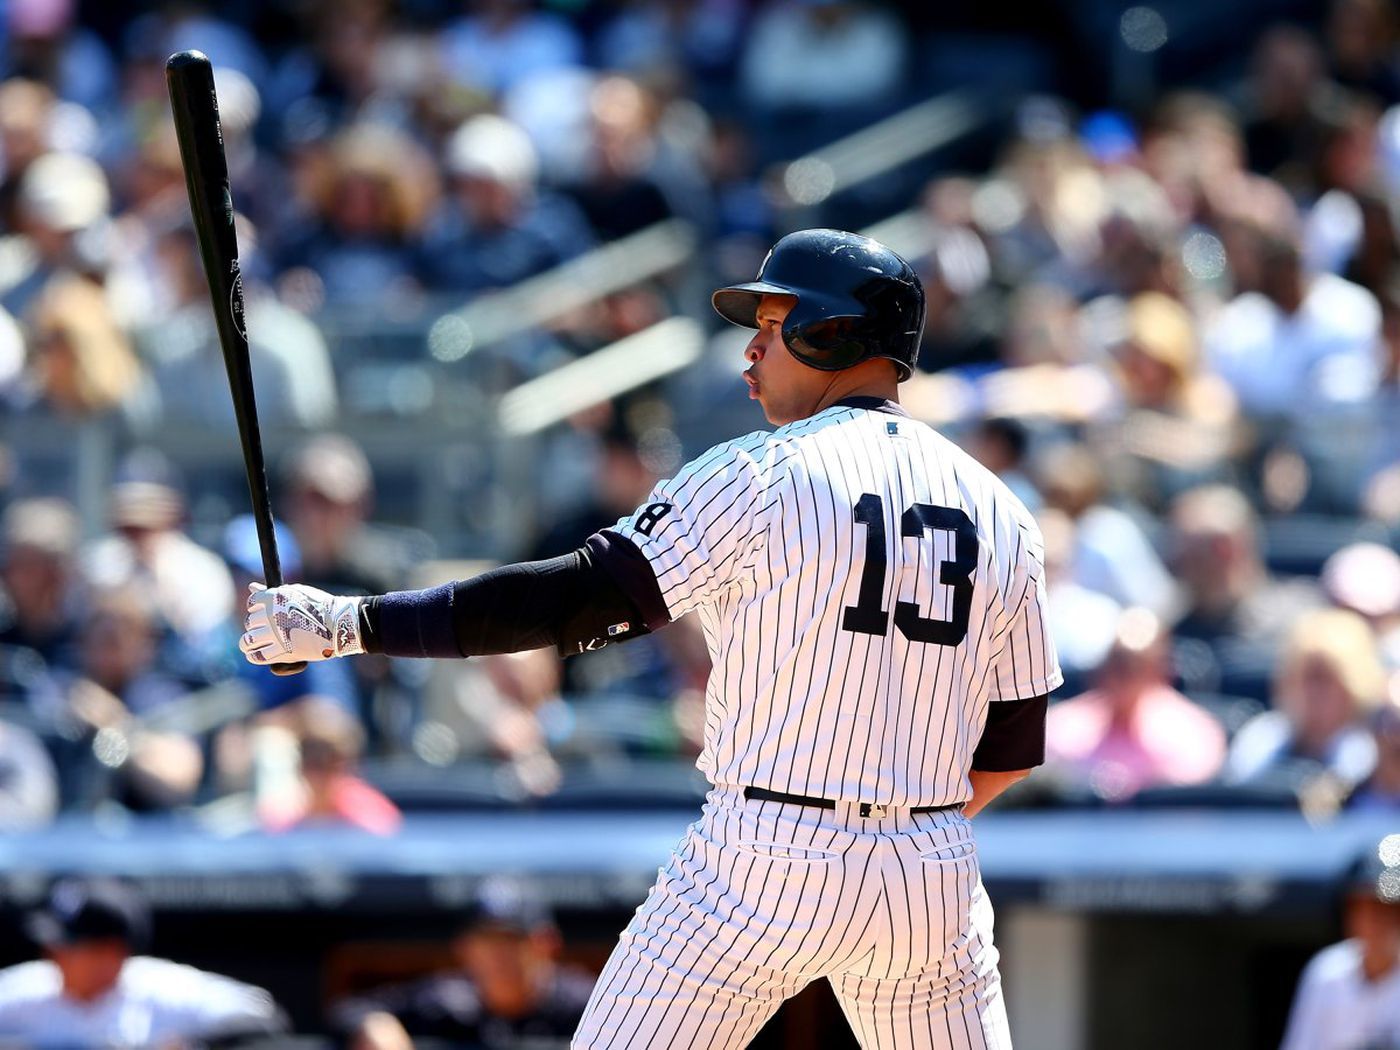 Yankees Are Spiteful And Petty To Deny A Rod A Shot At 700 Home